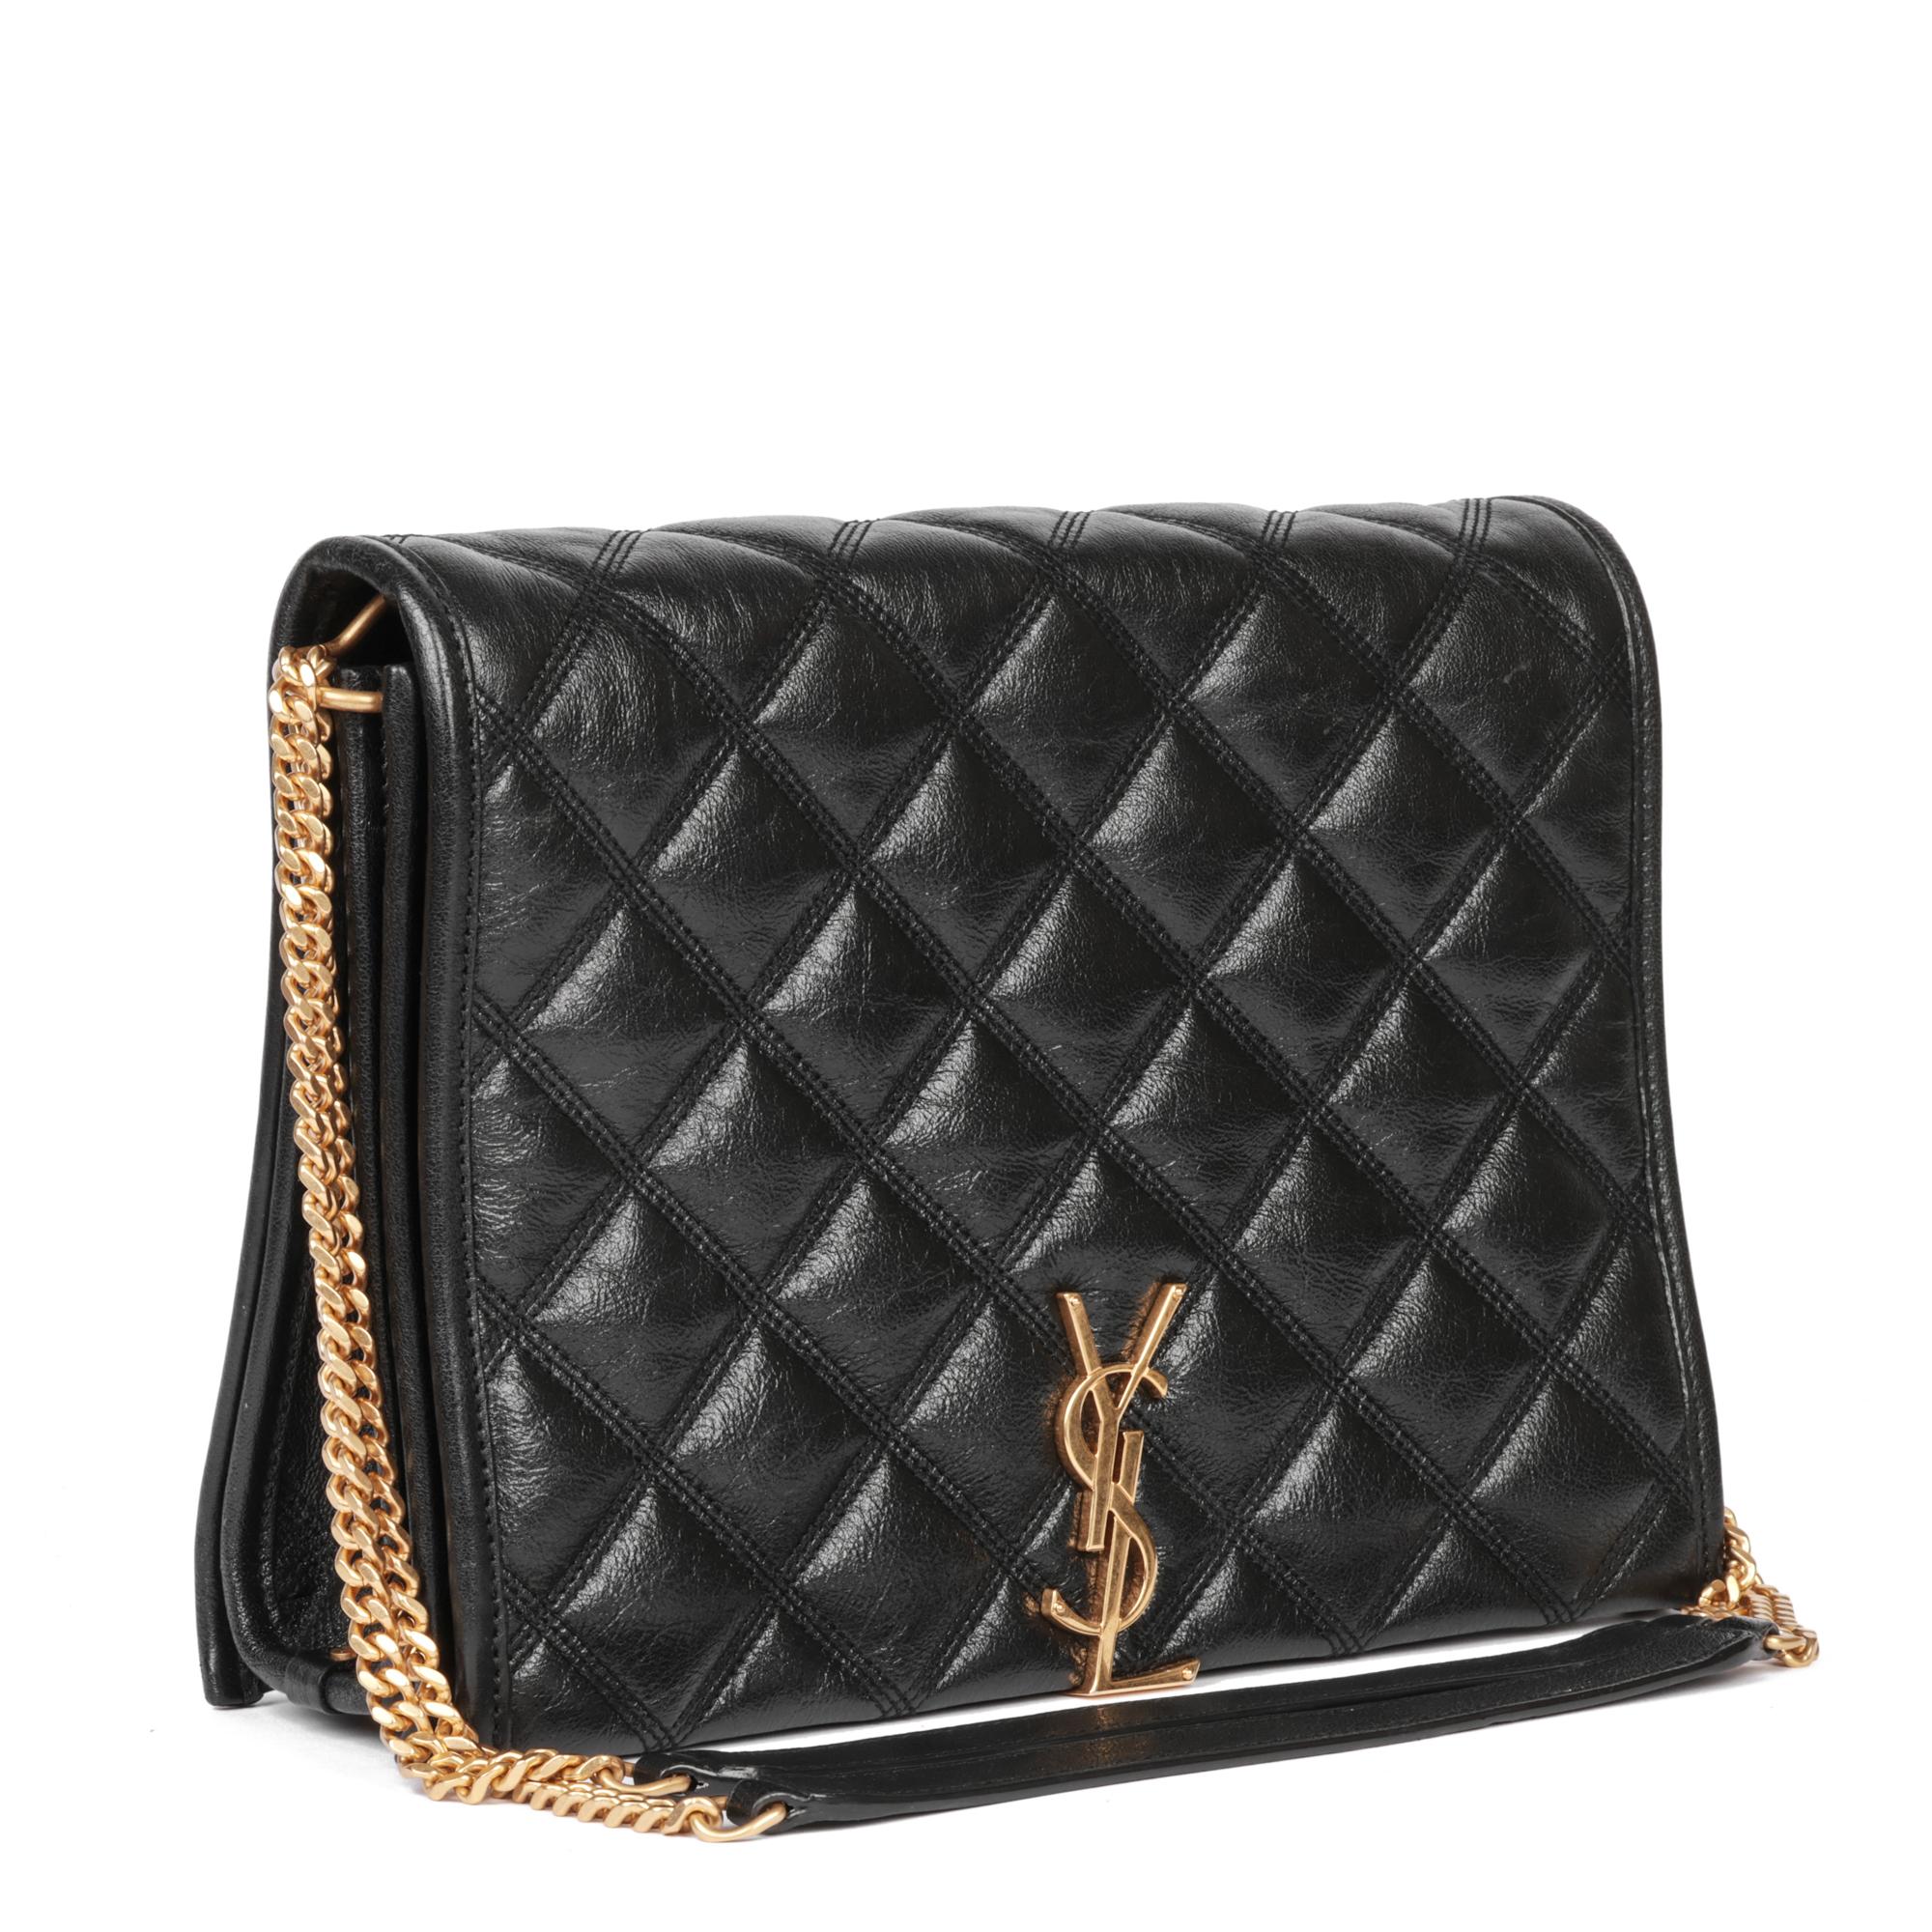 SAINT LAURENT
Black Quilted Lambskin Small Becky

Serial Number: GNR579607.0719
Age (Circa): 2019
Accompanied By: Saint Laurent Dust Bag
Authenticity Details: Date Stamp (Made in Italy) 
Gender: Ladies
Type: Shoulder, Crossbody

Colour: